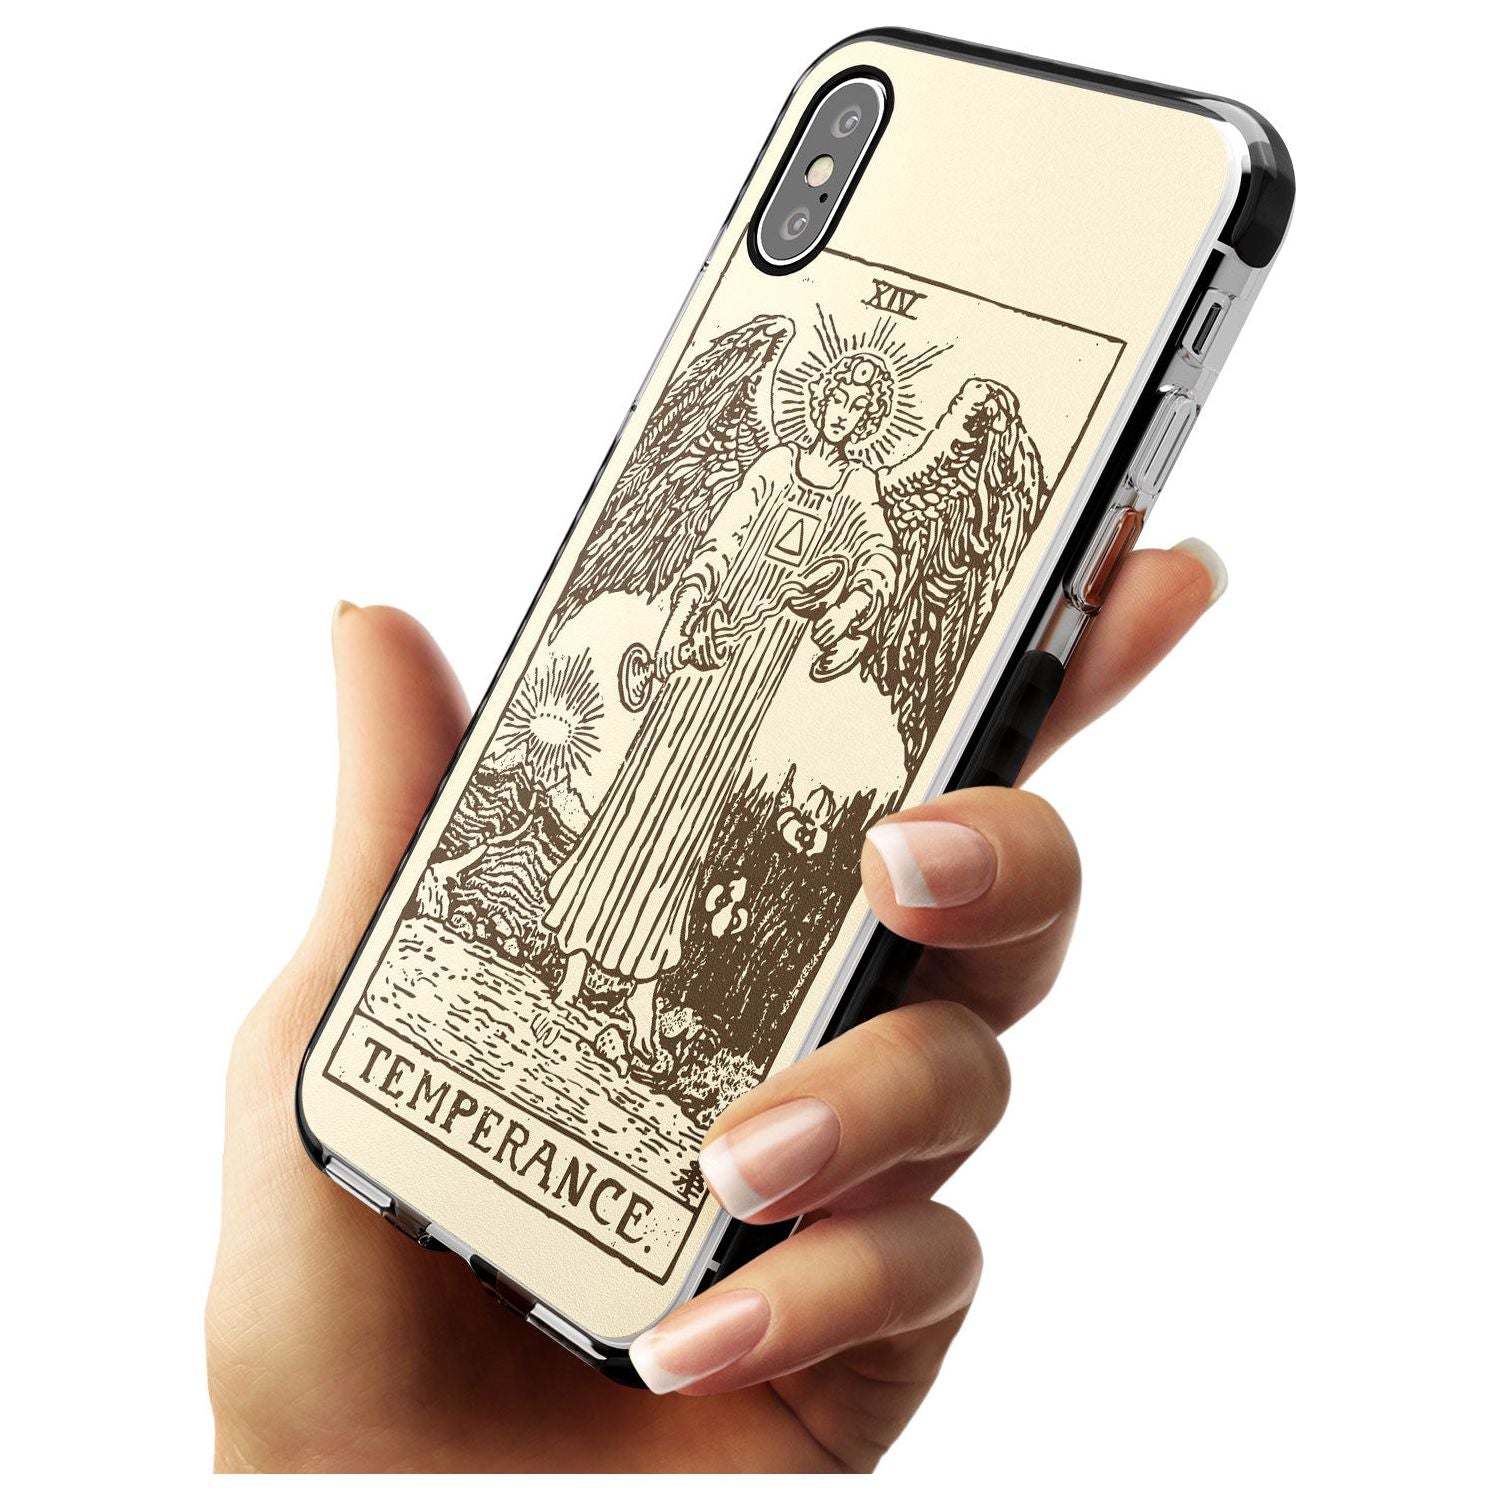 Temperance Tarot Card - Solid Cream Pink Fade Impact Phone Case for iPhone X XS Max XR